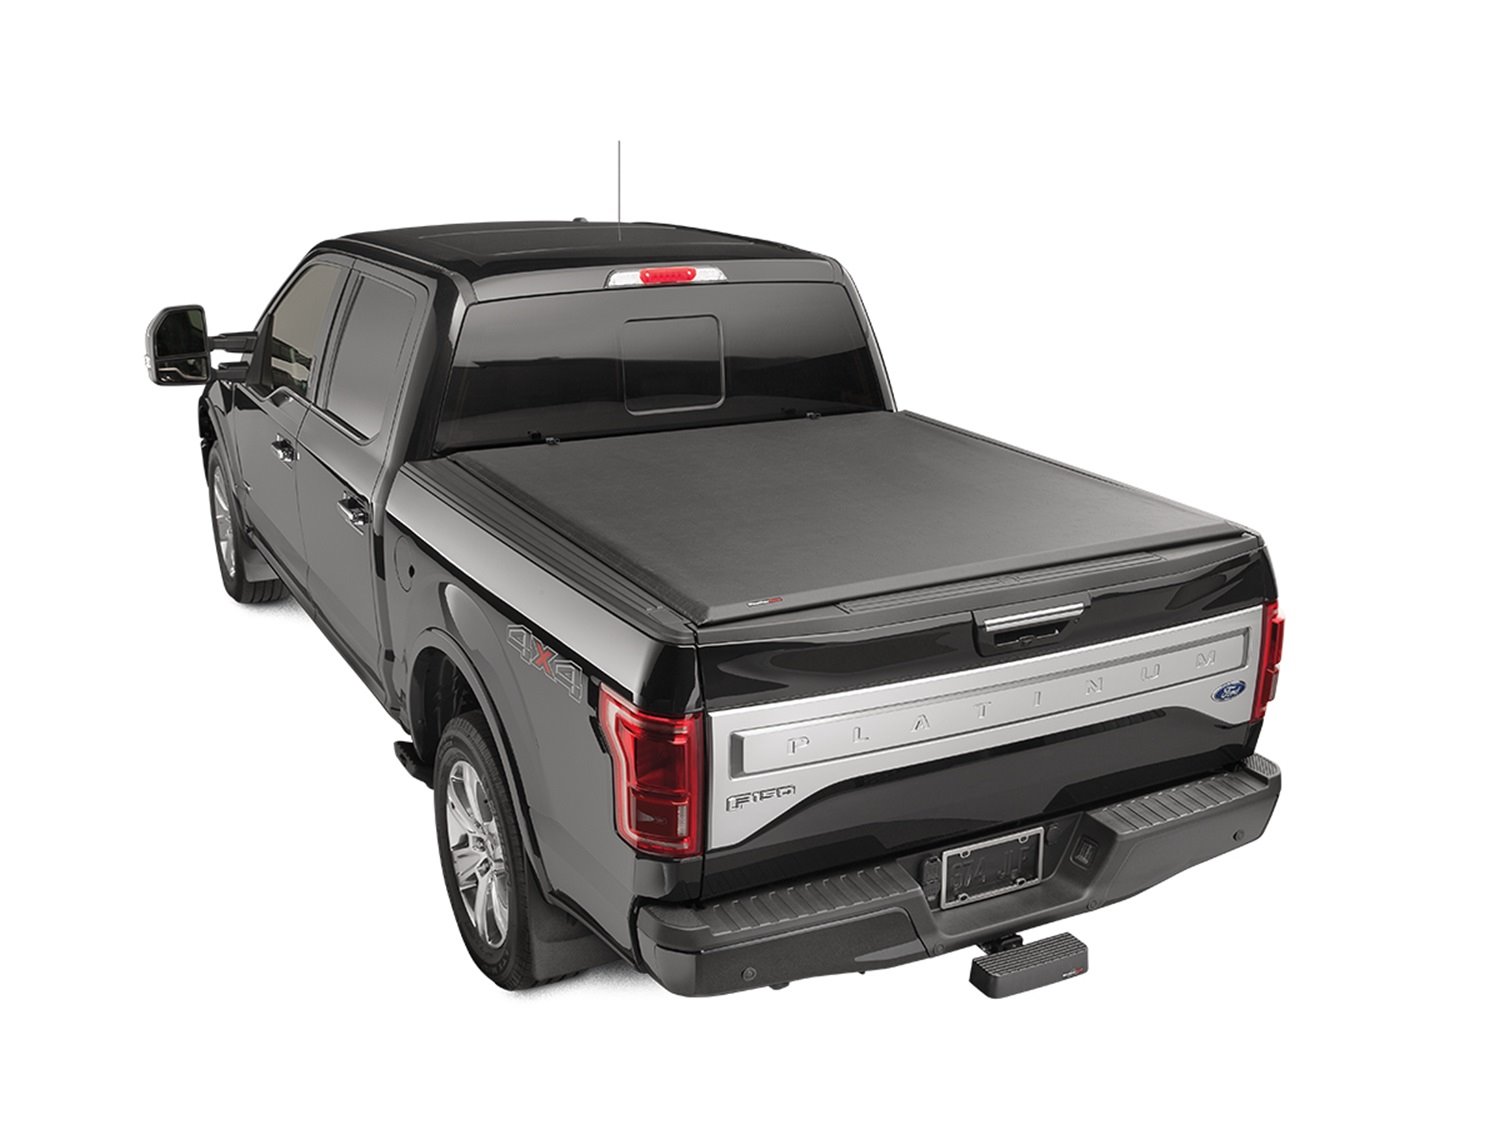 ROLL UP TRUCK BED COVER B TOYOTA TUNDRA 2000-2006 TUNDRA 6 4 BED FITS T-100